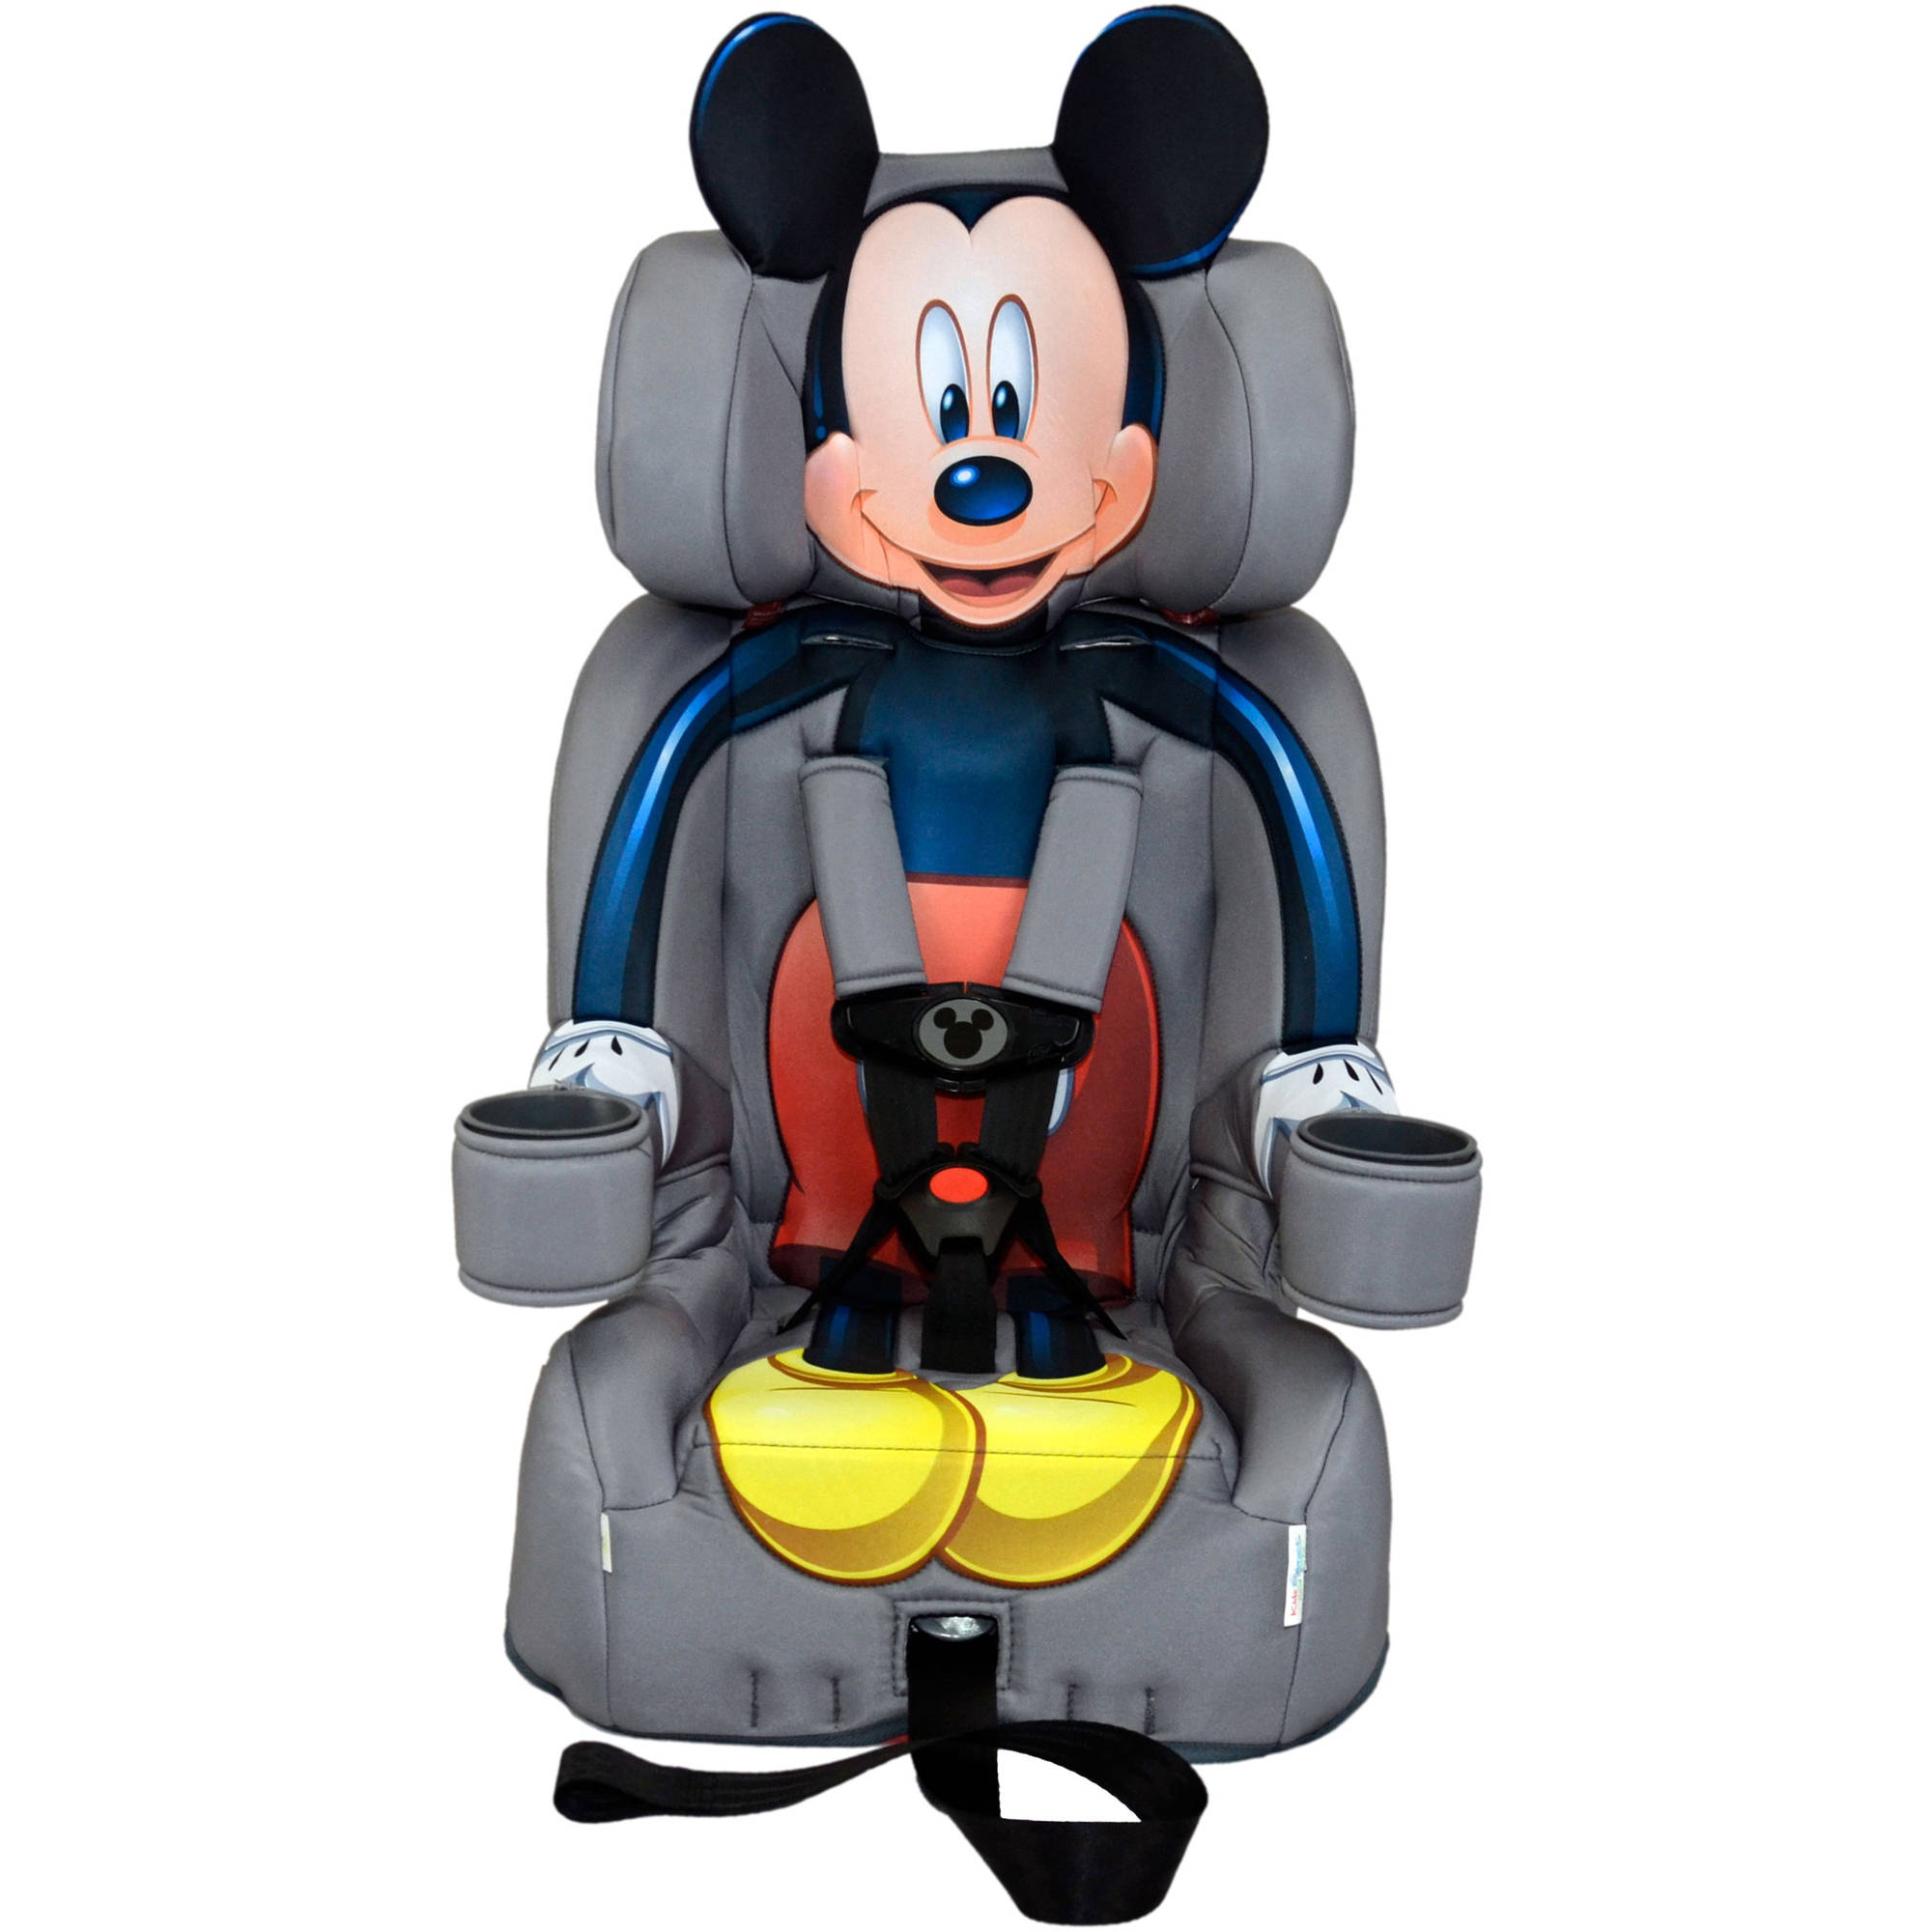 KidsEmbrace Combination Booster Car Seat, Disney Mickey Mouse